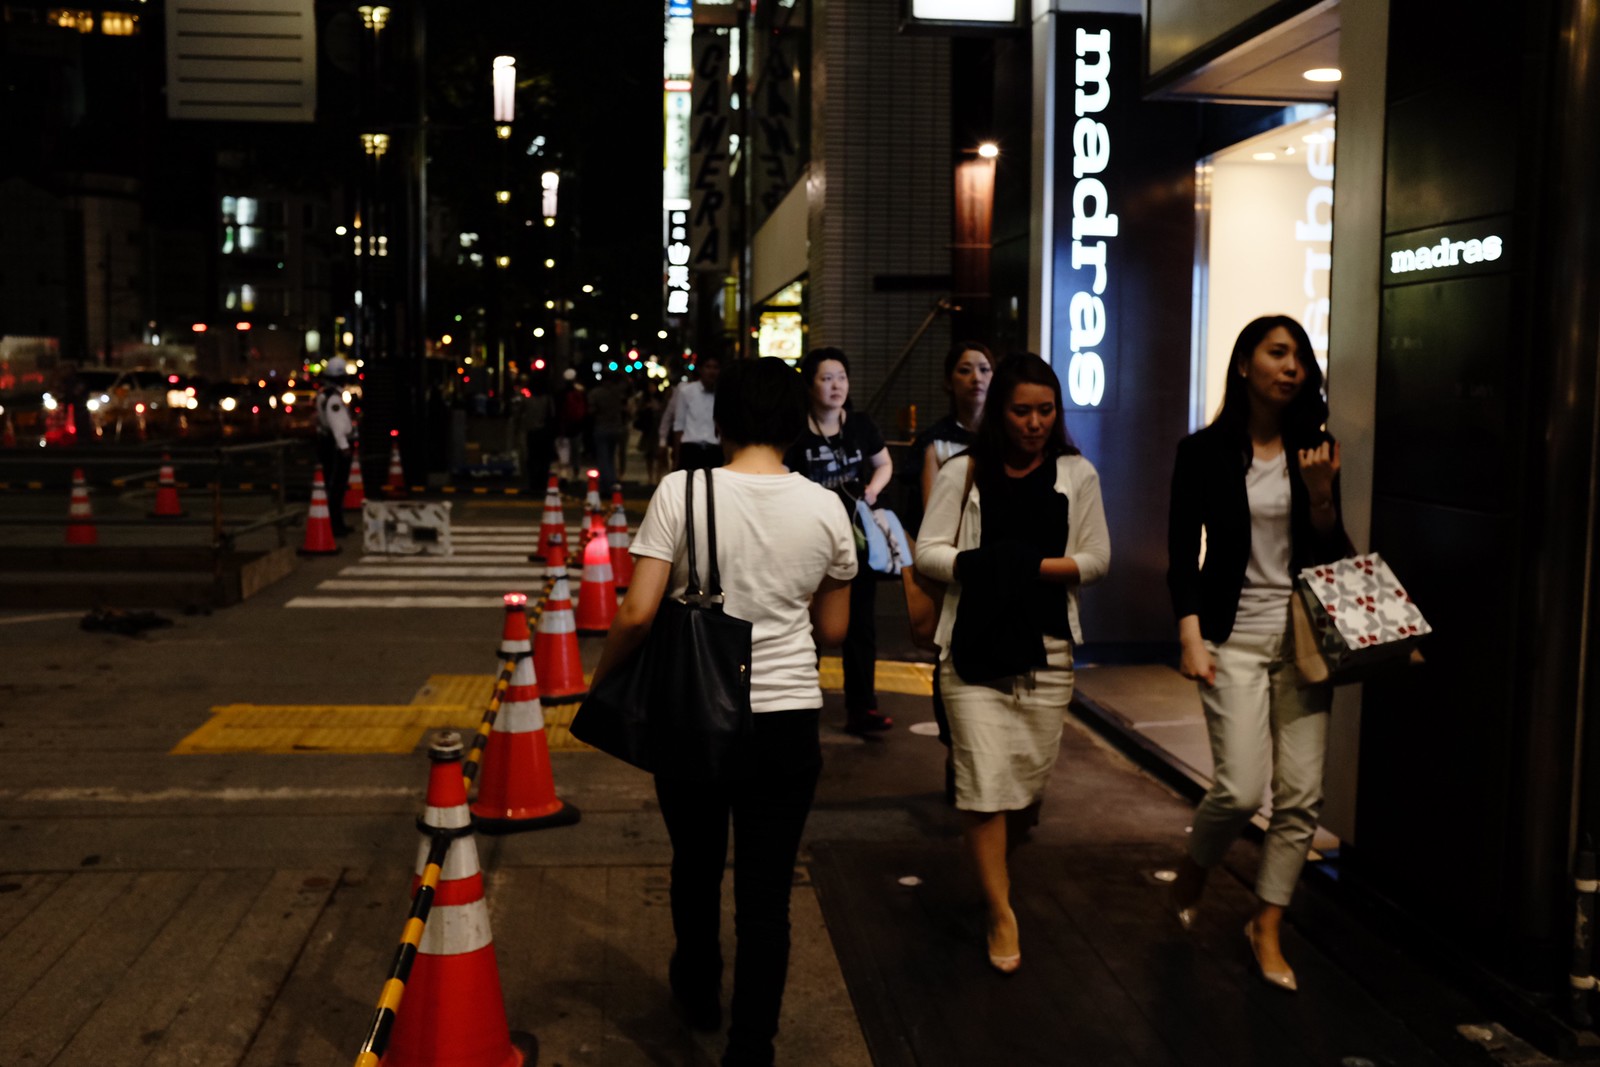 The Ginza night photo in Tokyo, Japan.